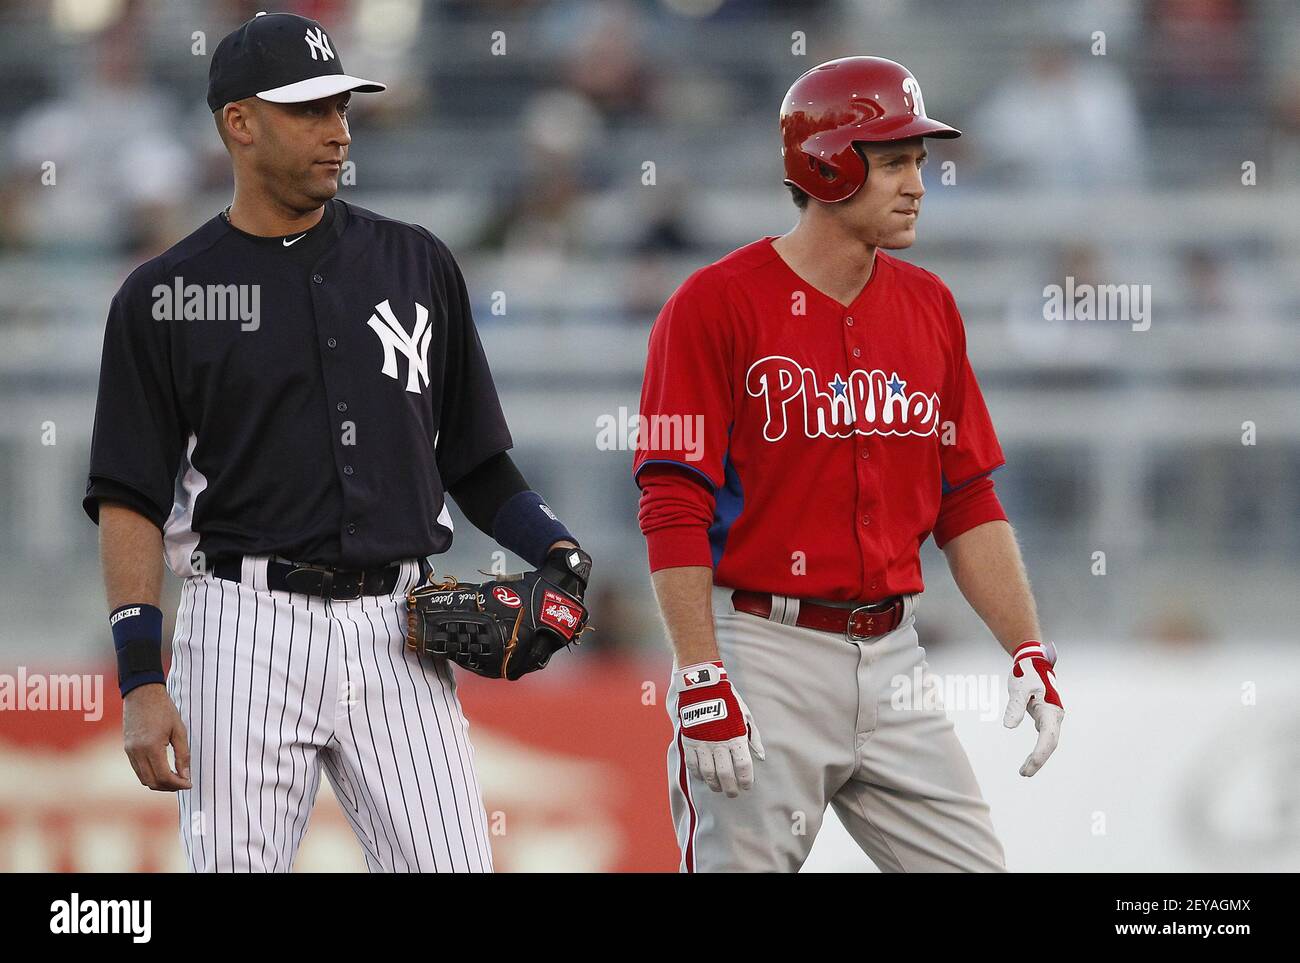 New York Yankees shortstop Derek Jeter, left, keeps an eye on the  Philadelphia Phillies' Chase Utley as he takes a lead from second base  during the first inning in Tampa, Florida, in